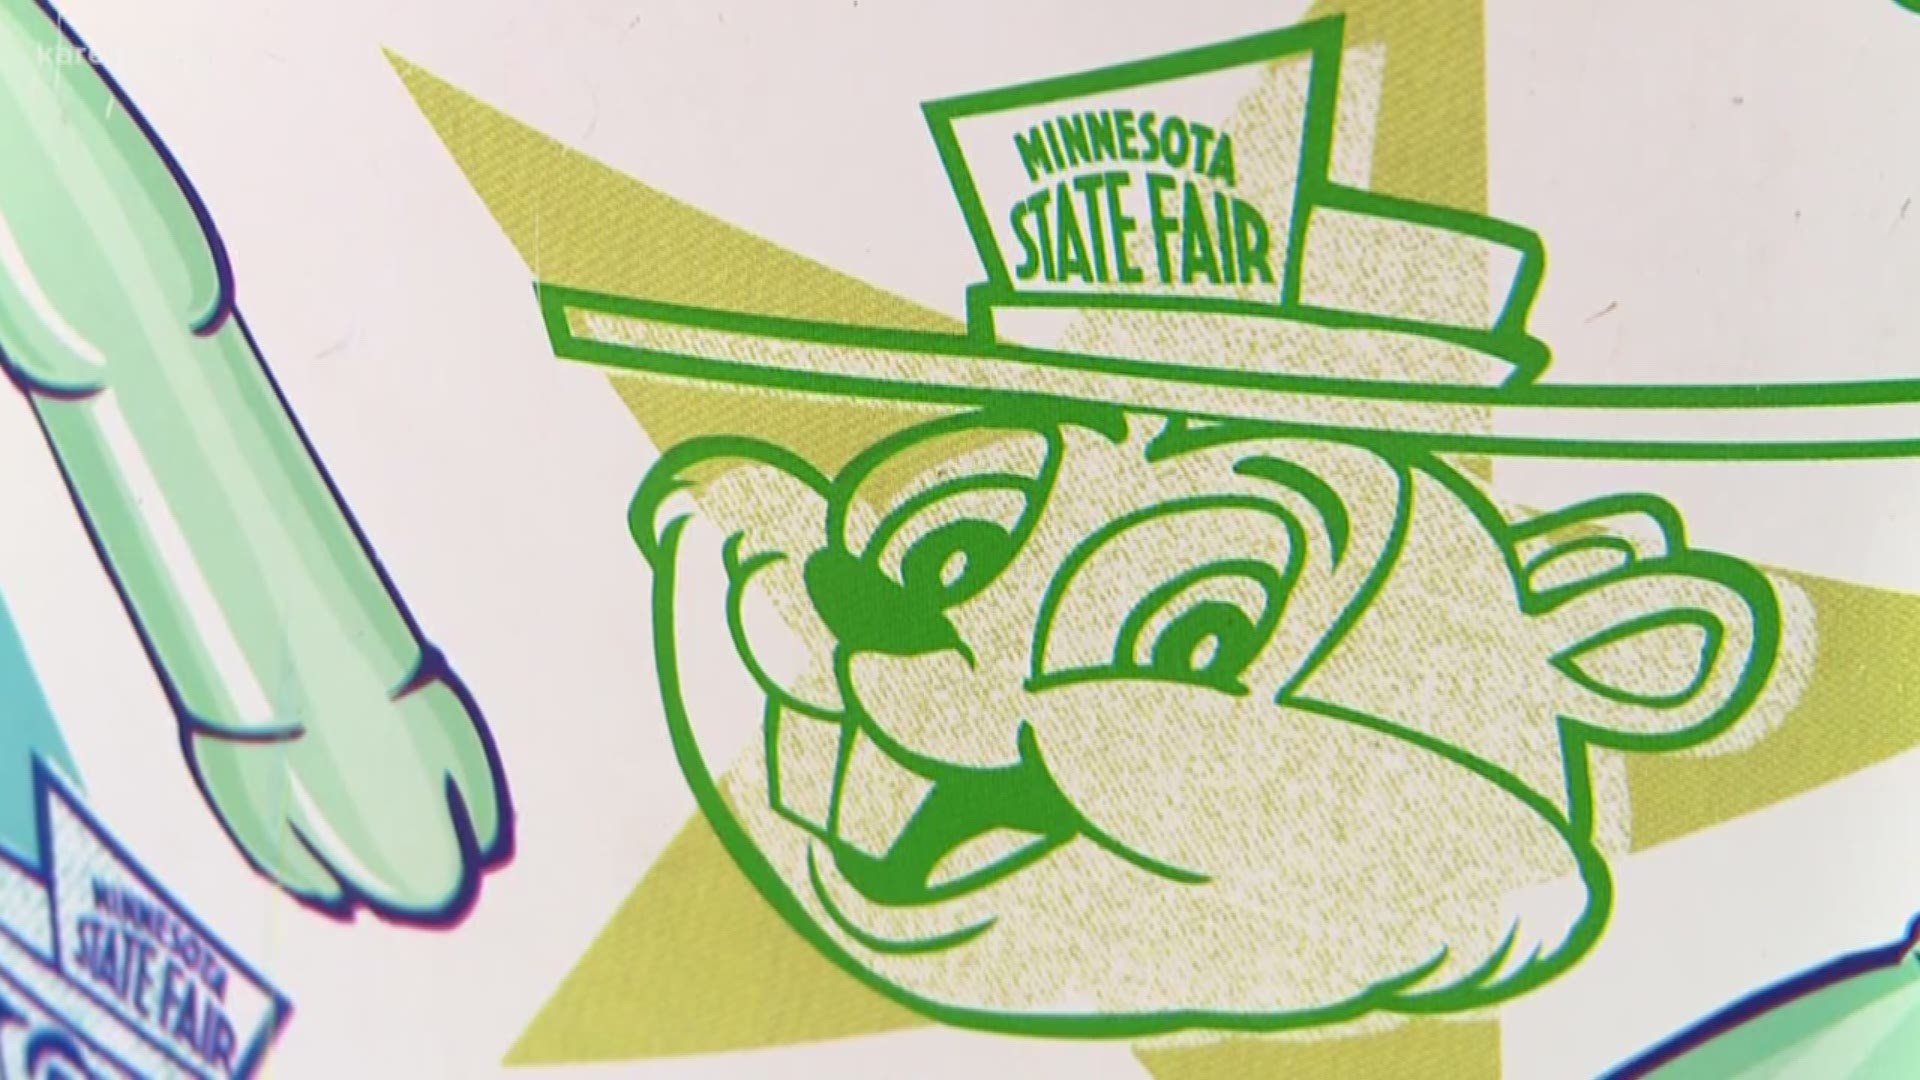 The last two weeks leading up to the state fair are busy ones for vendors and workers. https://kare11.tv/2Op5emA